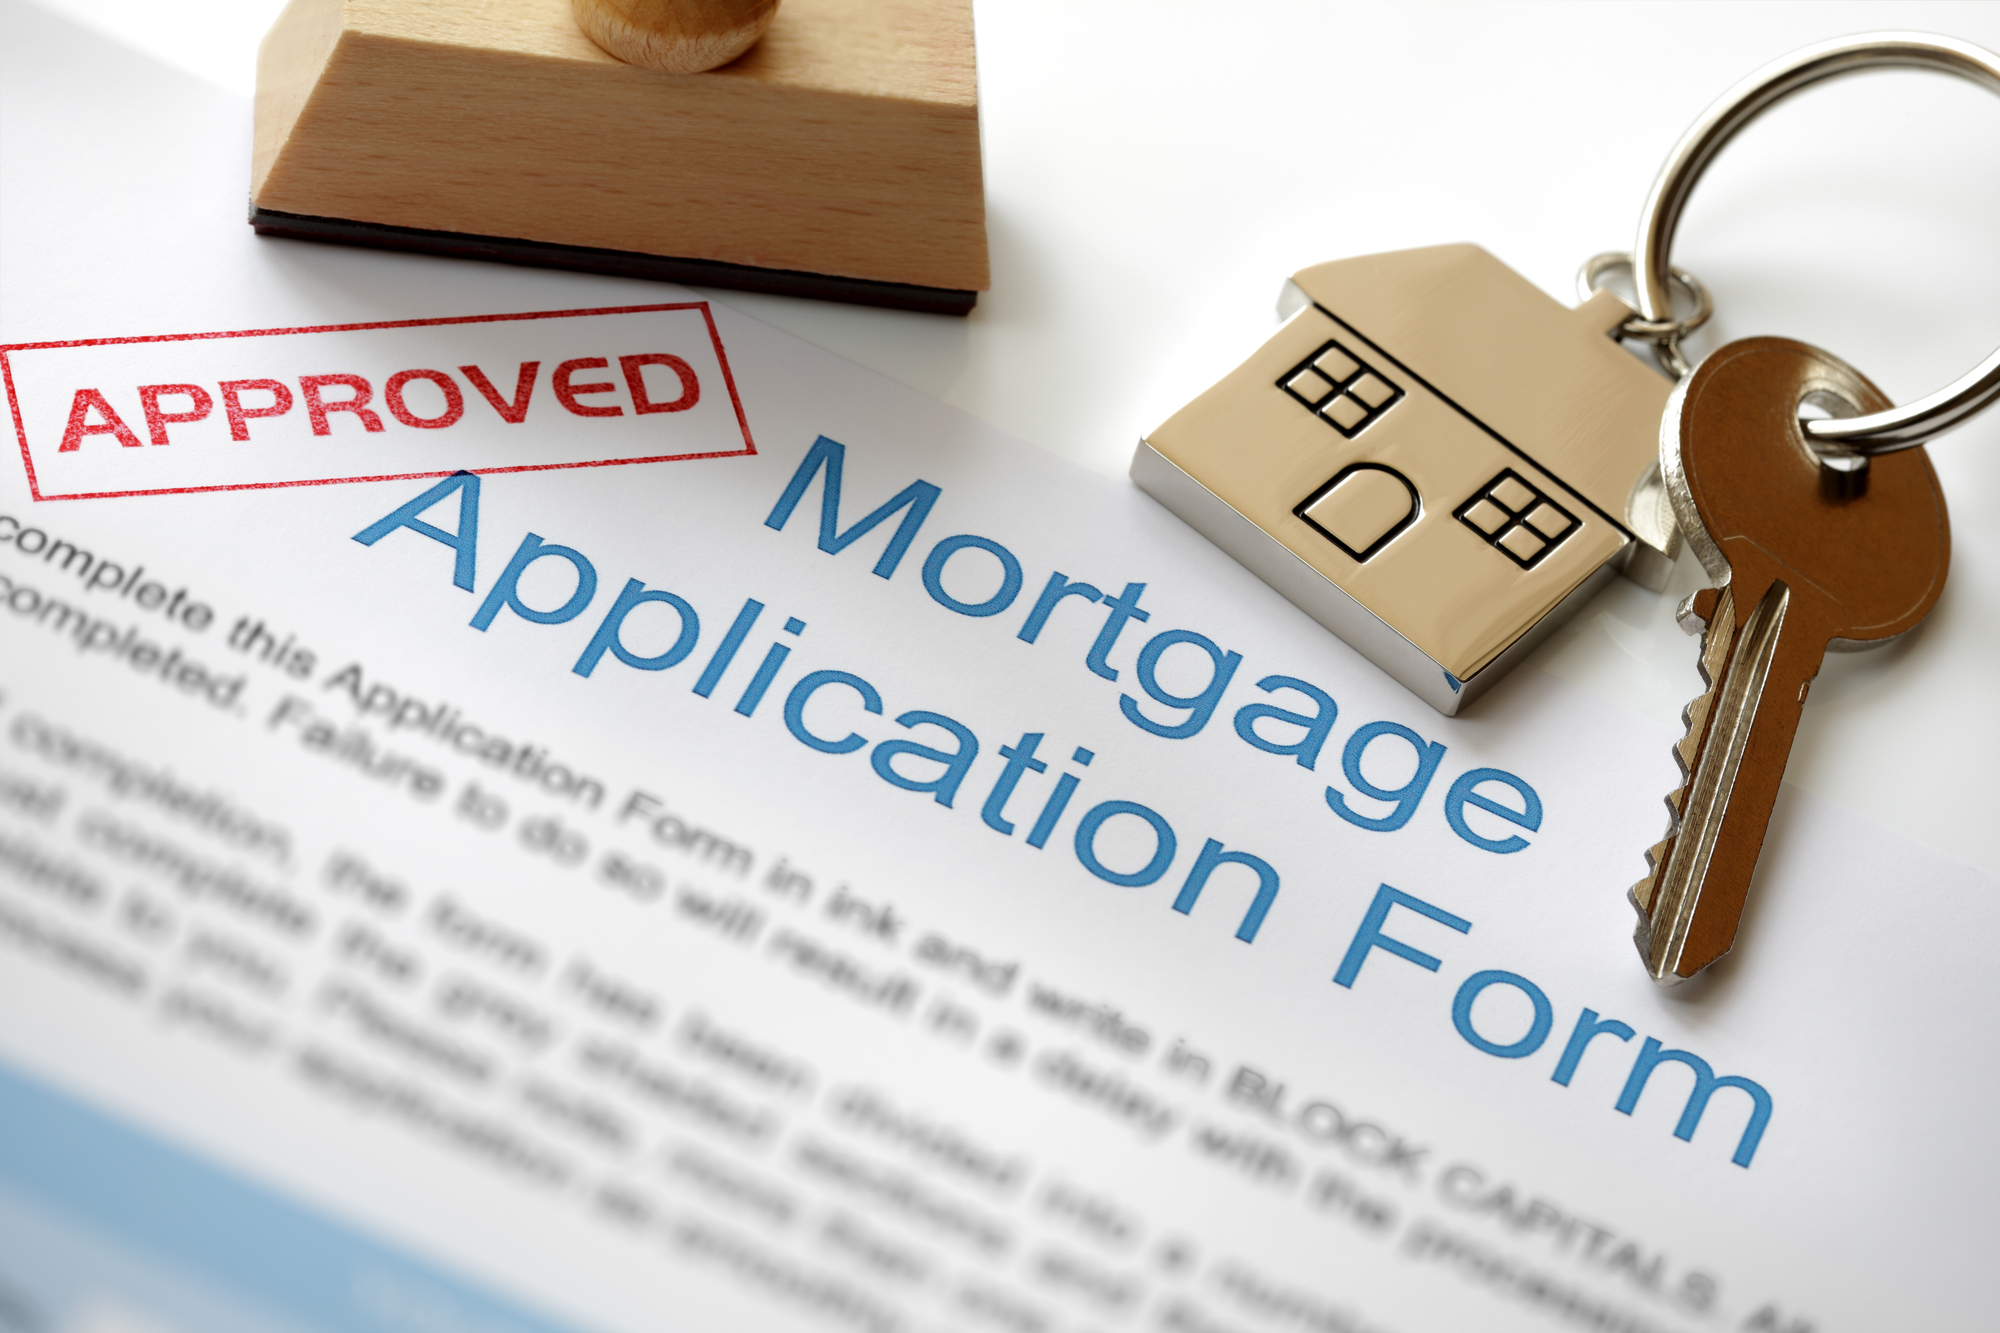 Keys sitting on top of paper that says "Mortgage Application Form"